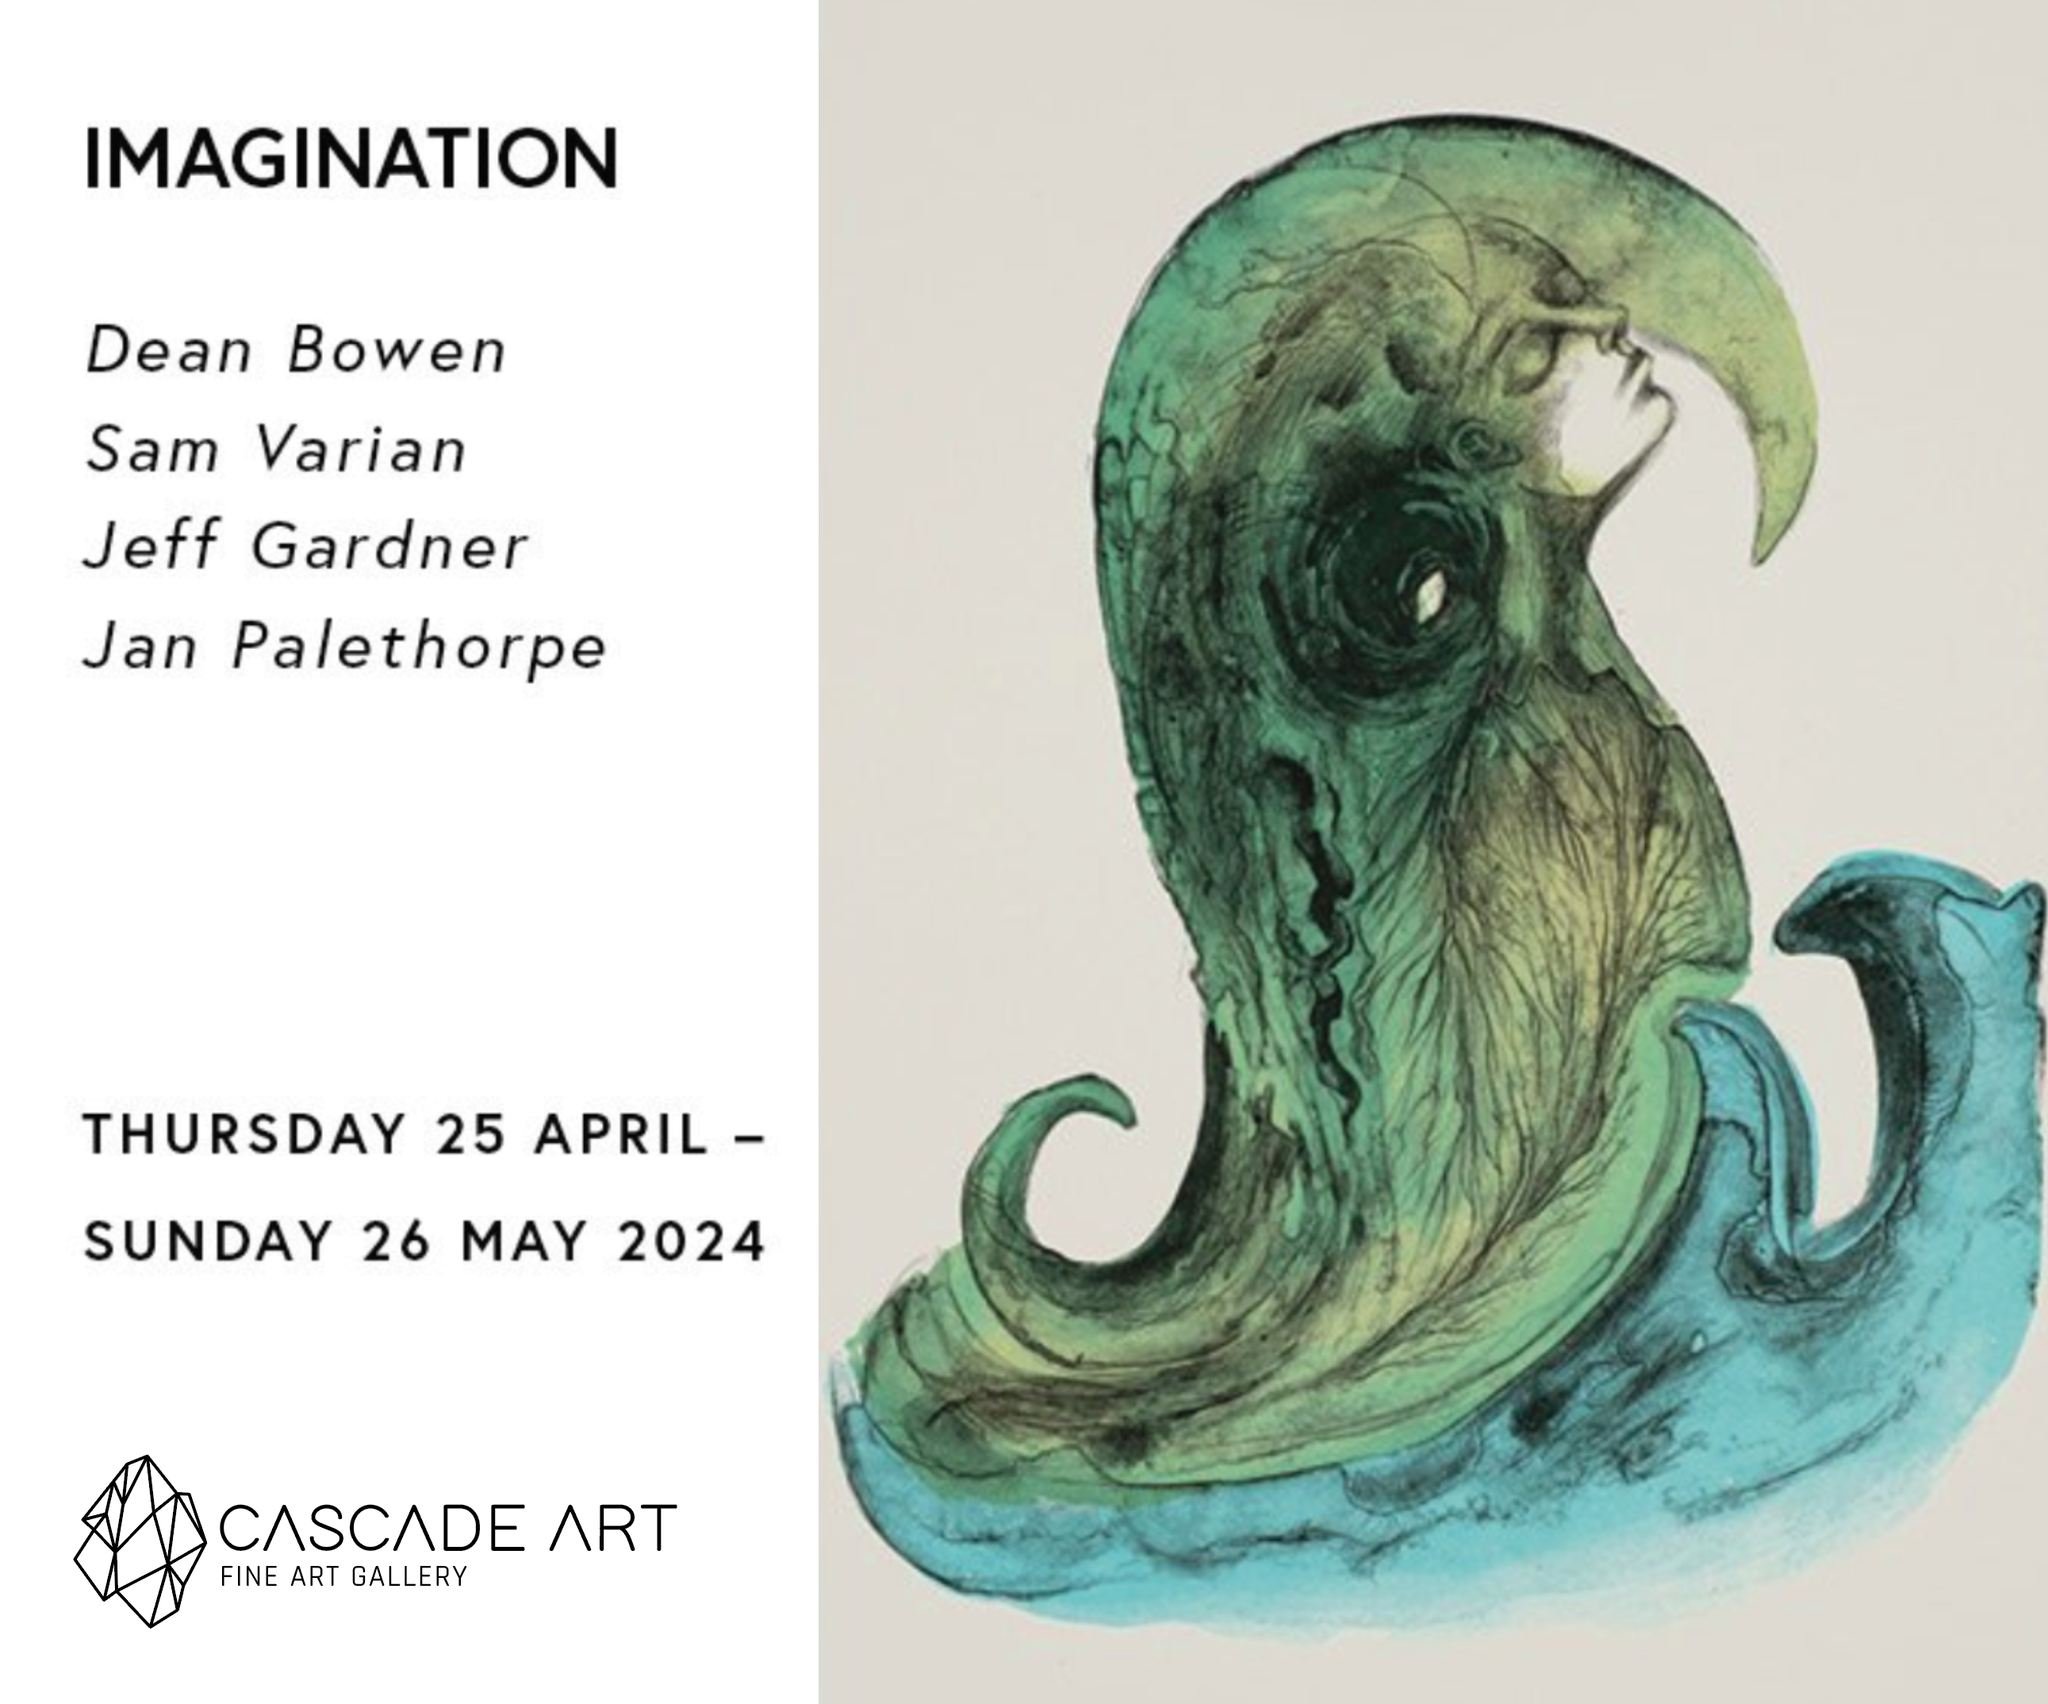 Have you visited the exhibition, IMAGINATION yet? Recently opened at Cascade Art Gallery, in 'The Church' at Maldon, it is sure to delight. Featuring works by Dean Bowen, Sam Varian, Jeff Gardner and Jan Palethorpe. Open Thursday to Sunday, 10am - 5p